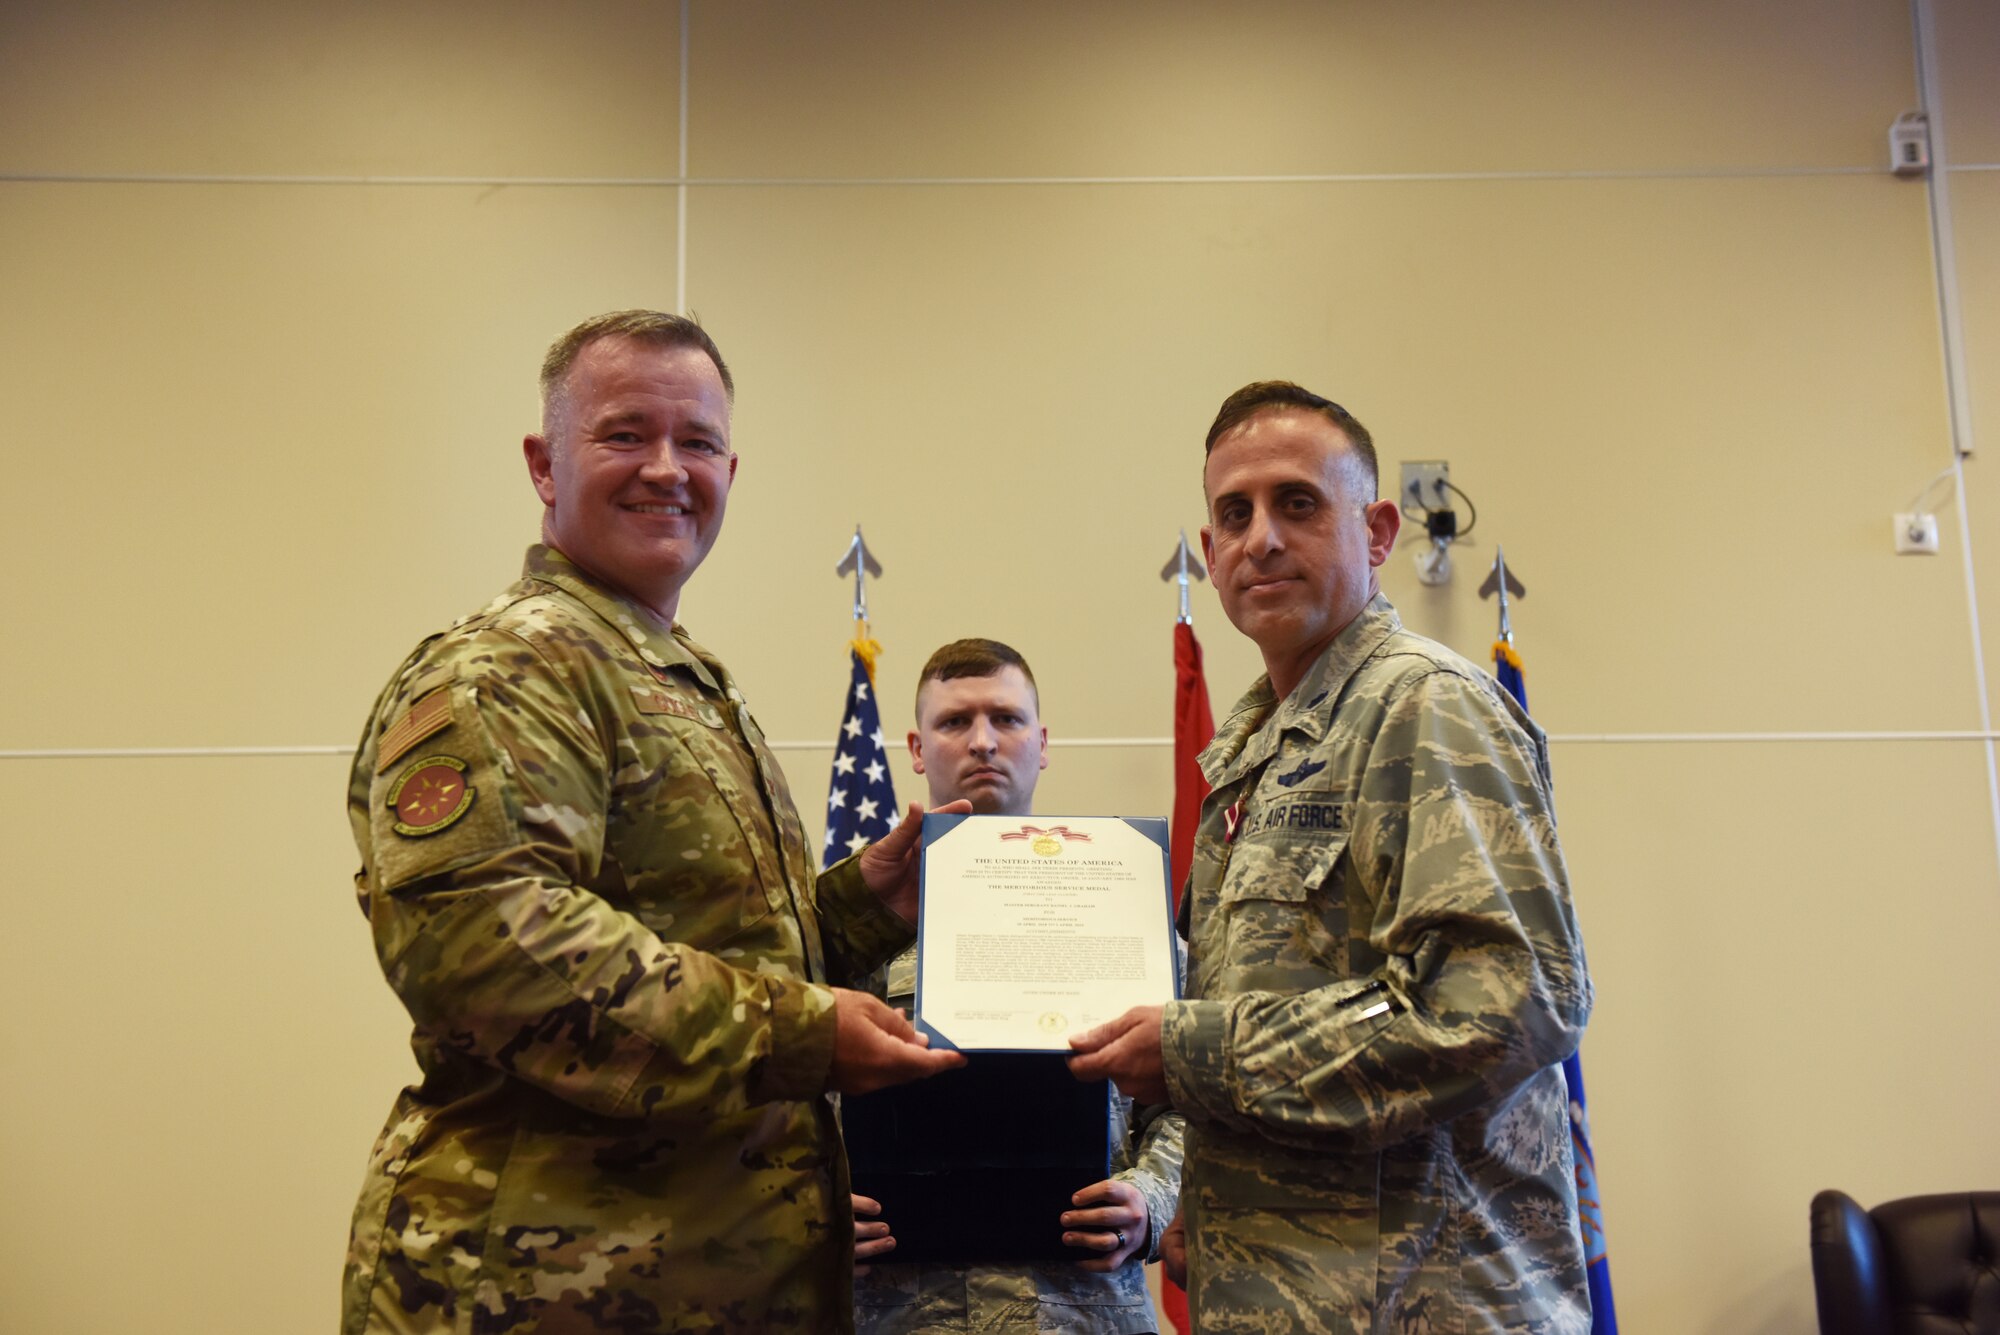 Col. Paul R. Quigley, 39th Weapons System Security Group commander, left, presents the Meritorious Service Medal to Lt. Col. John A. Talafuse, outgoing 39th Operations Support Squadron commander, during a change of command ceremony June 6, 2019, on Incirlik Air Base, Turkey. During his time as commander, Talafuse oversaw 80,000 operations at the U.S. Air Force’s busiest air traffic control complex in Europe. (U.S. Air Force photo by Senior Airman Joshua Magbanua)